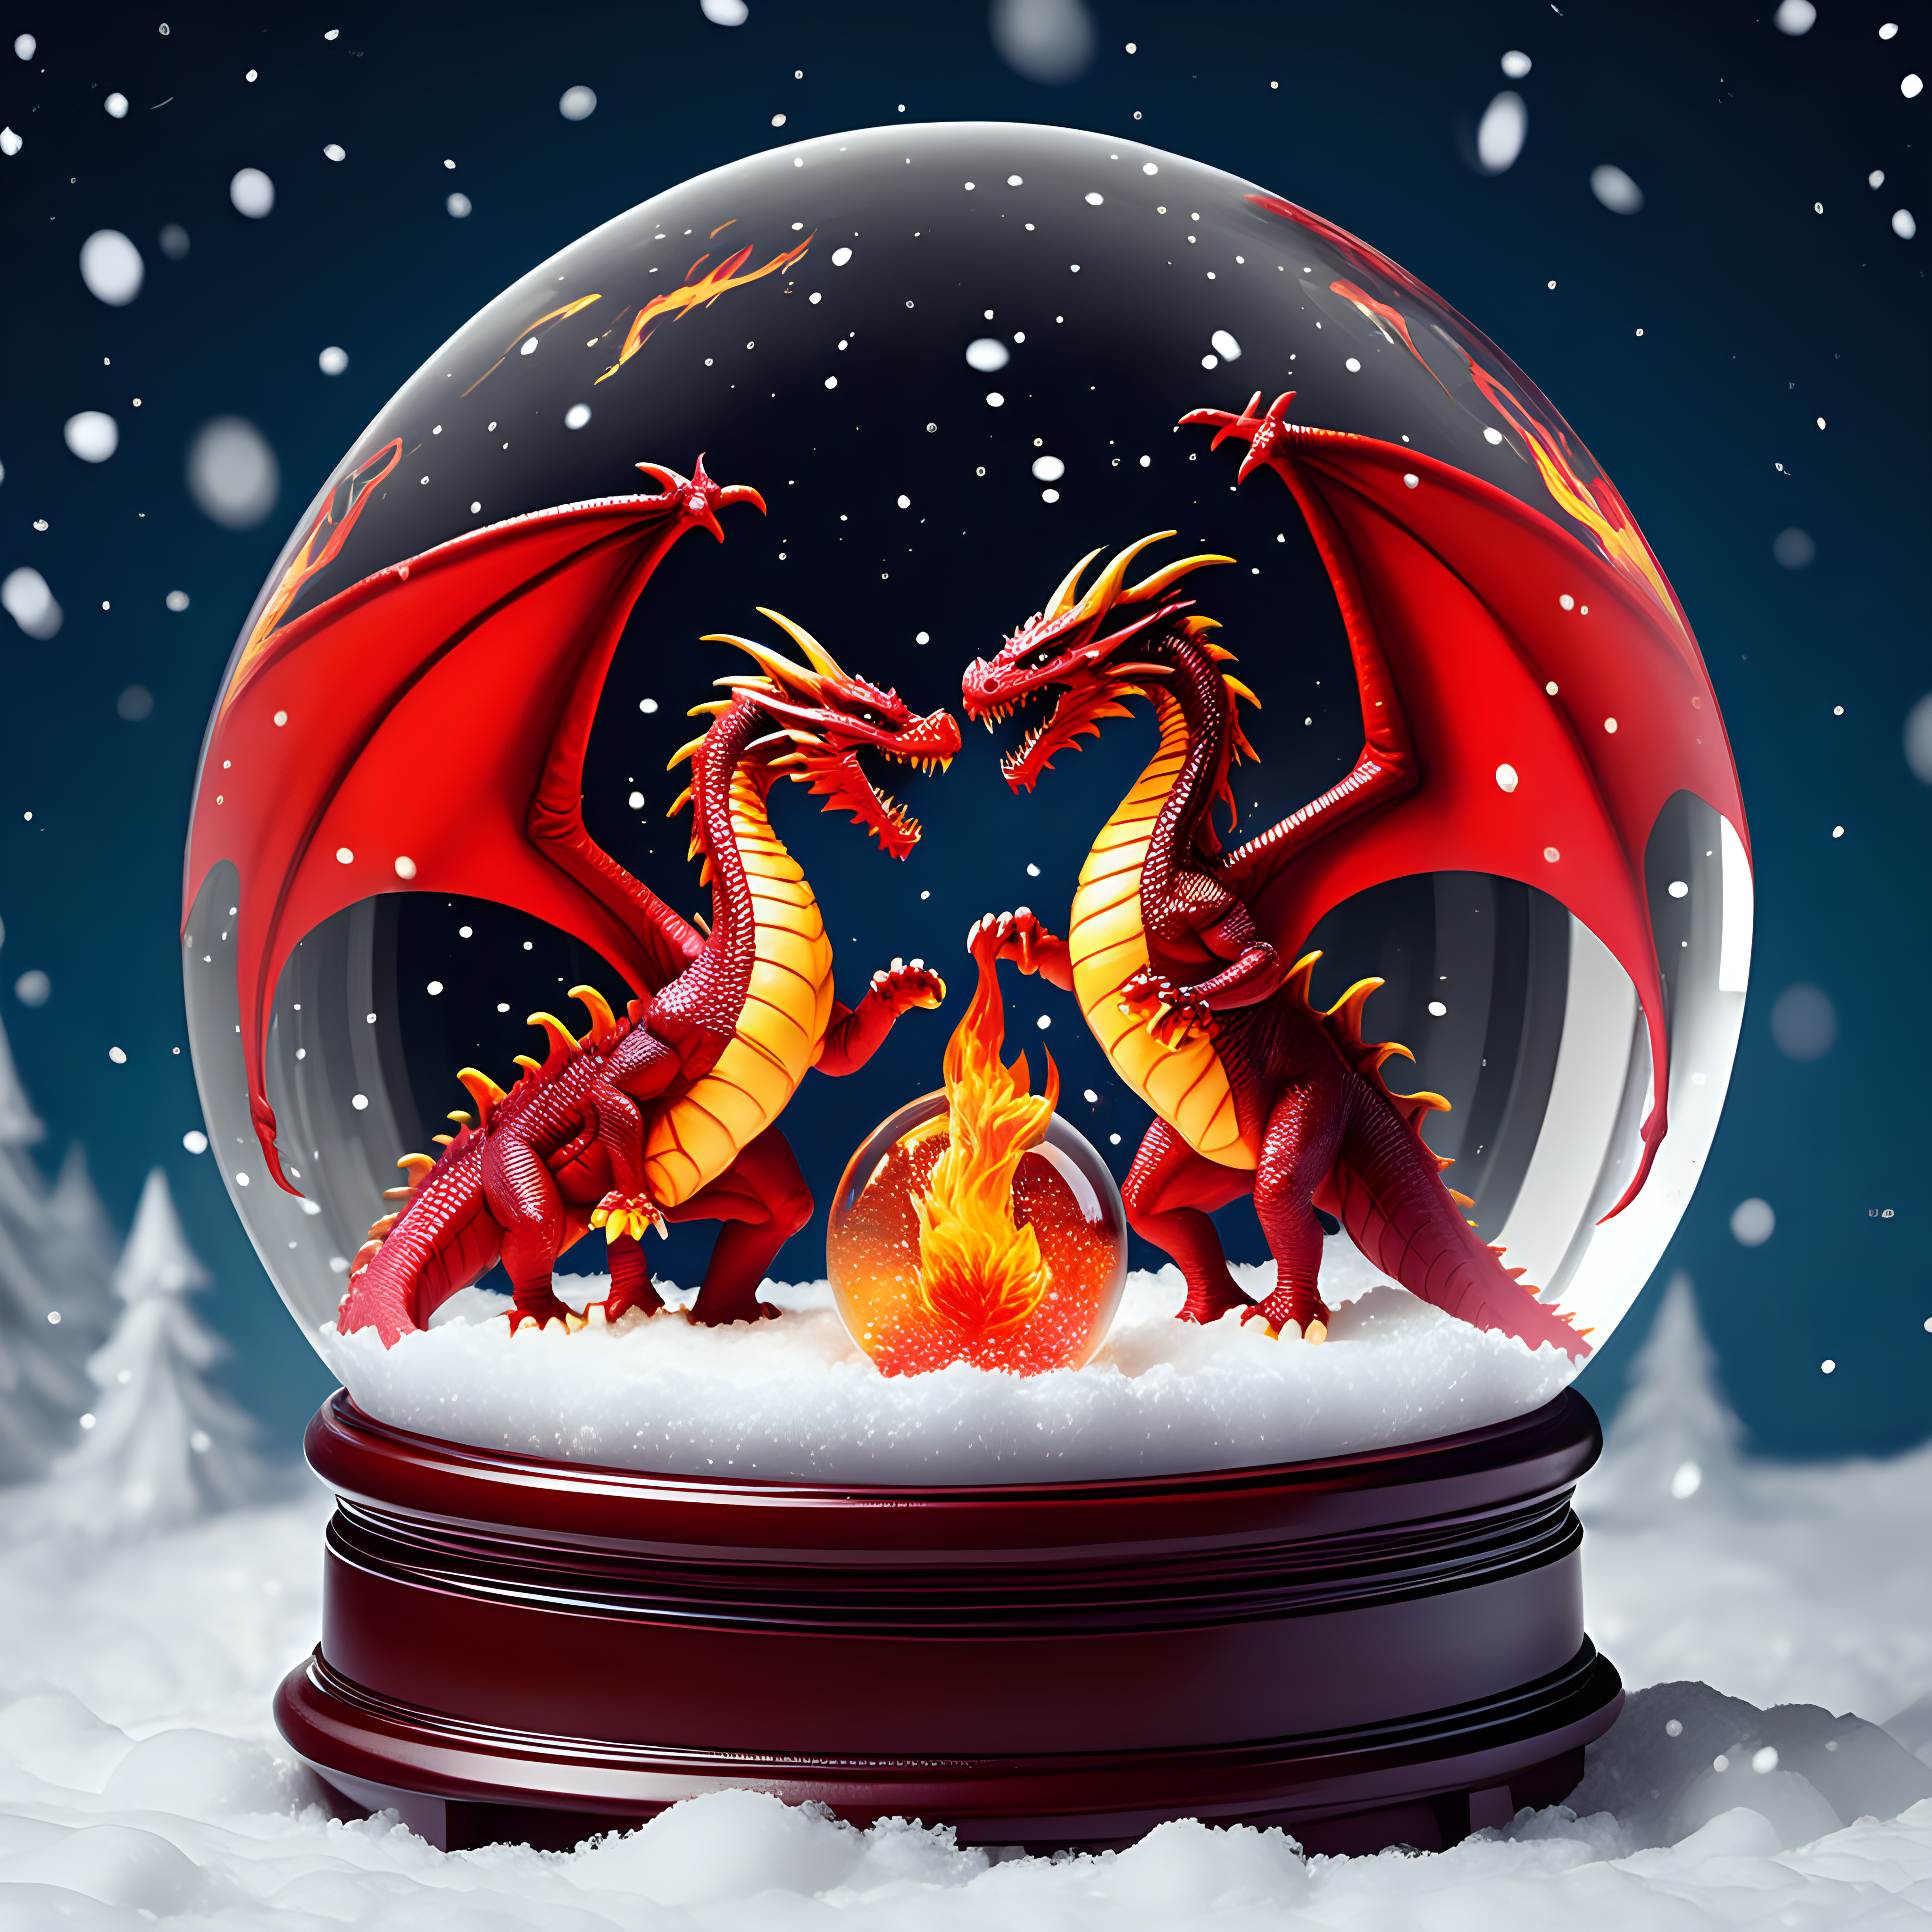 red 2 headed fire breathing dragon in a snow globe